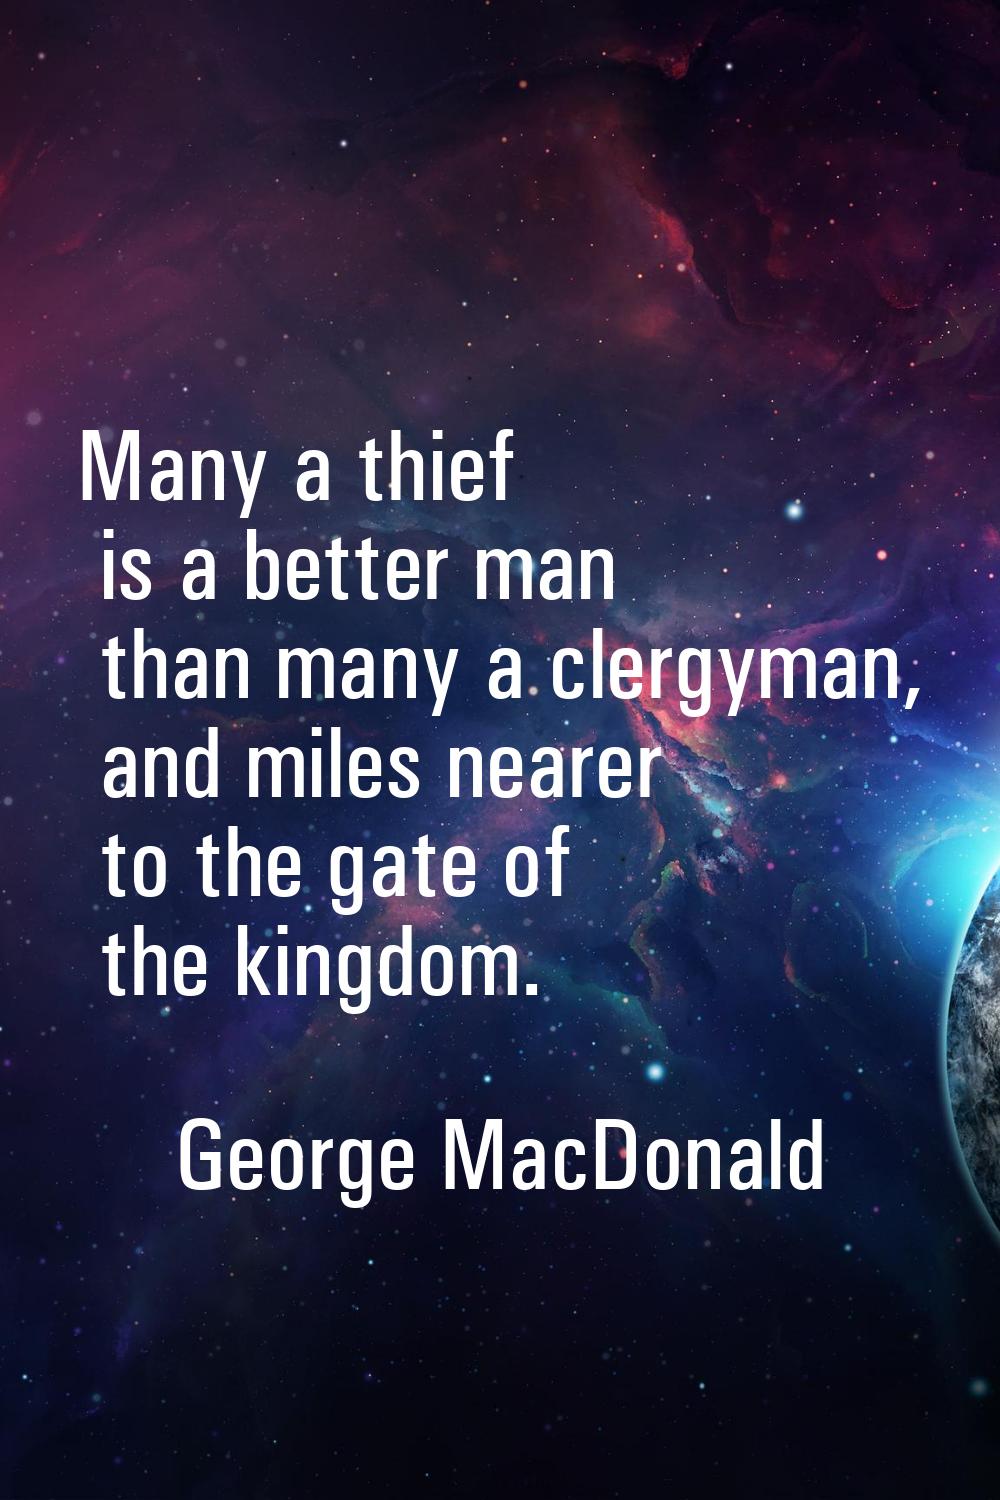 Many a thief is a better man than many a clergyman, and miles nearer to the gate of the kingdom.